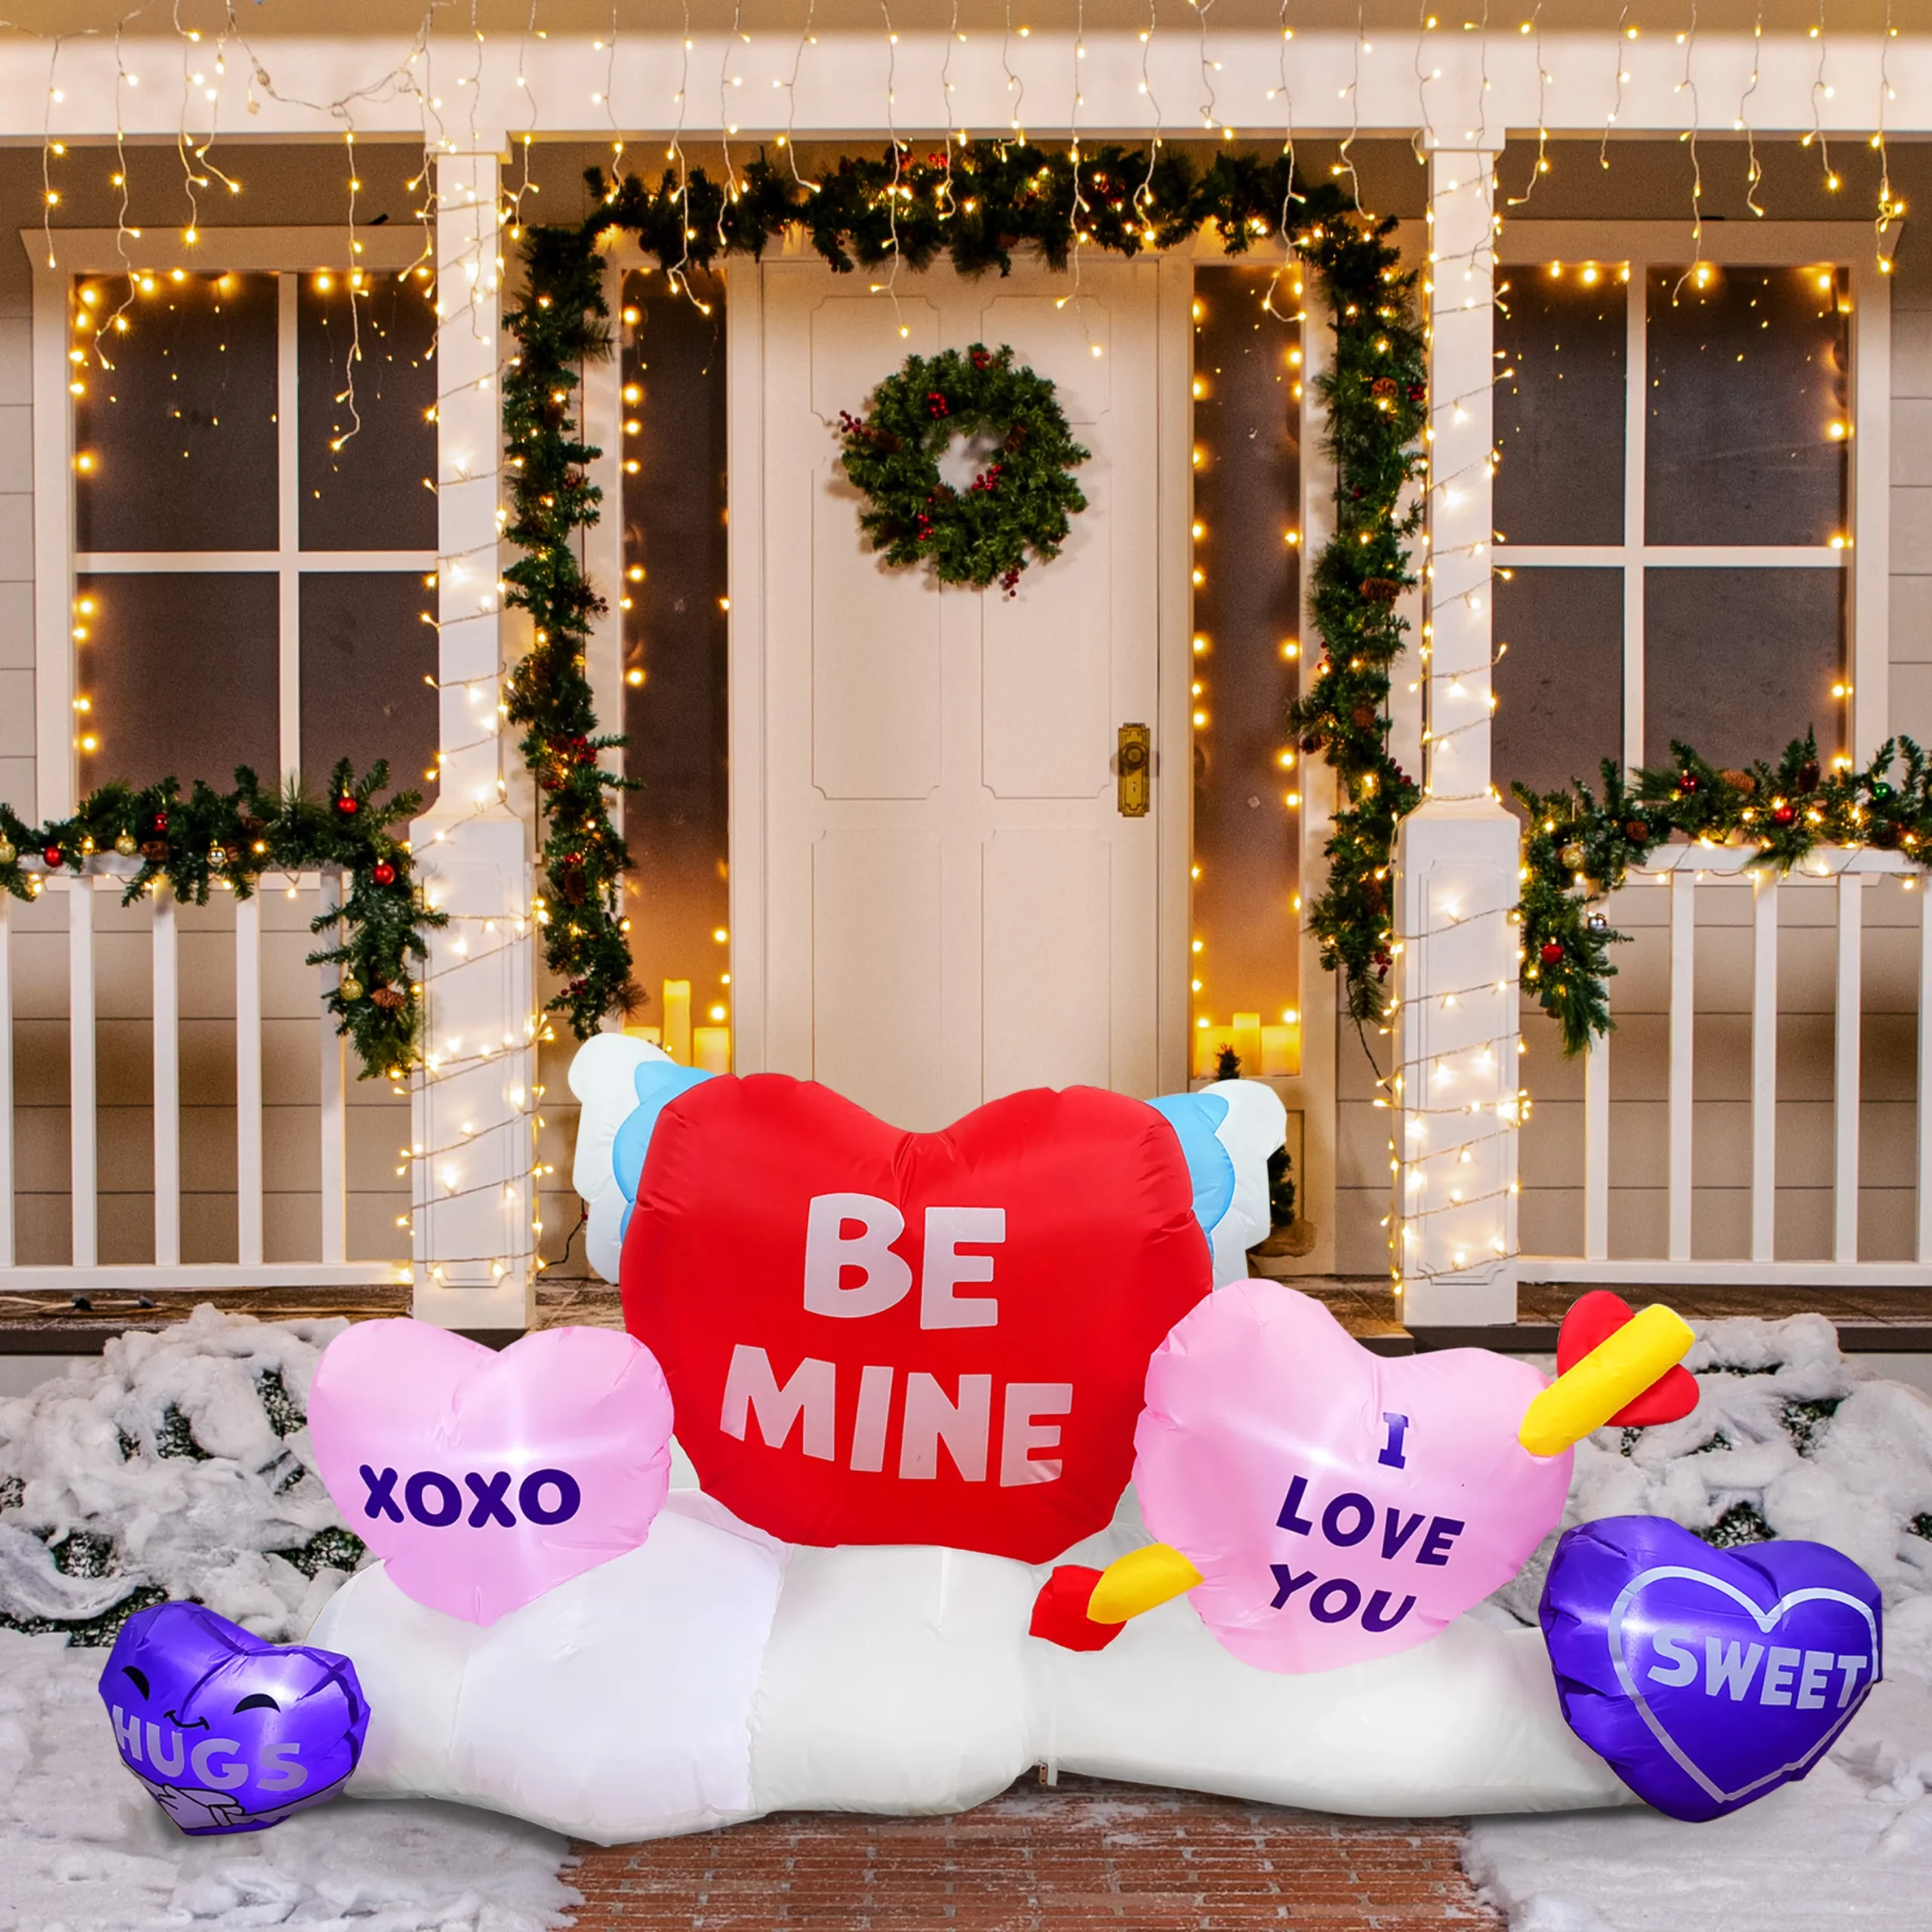 You are currently viewing How to decorate the front porch for Valentine’s Day?